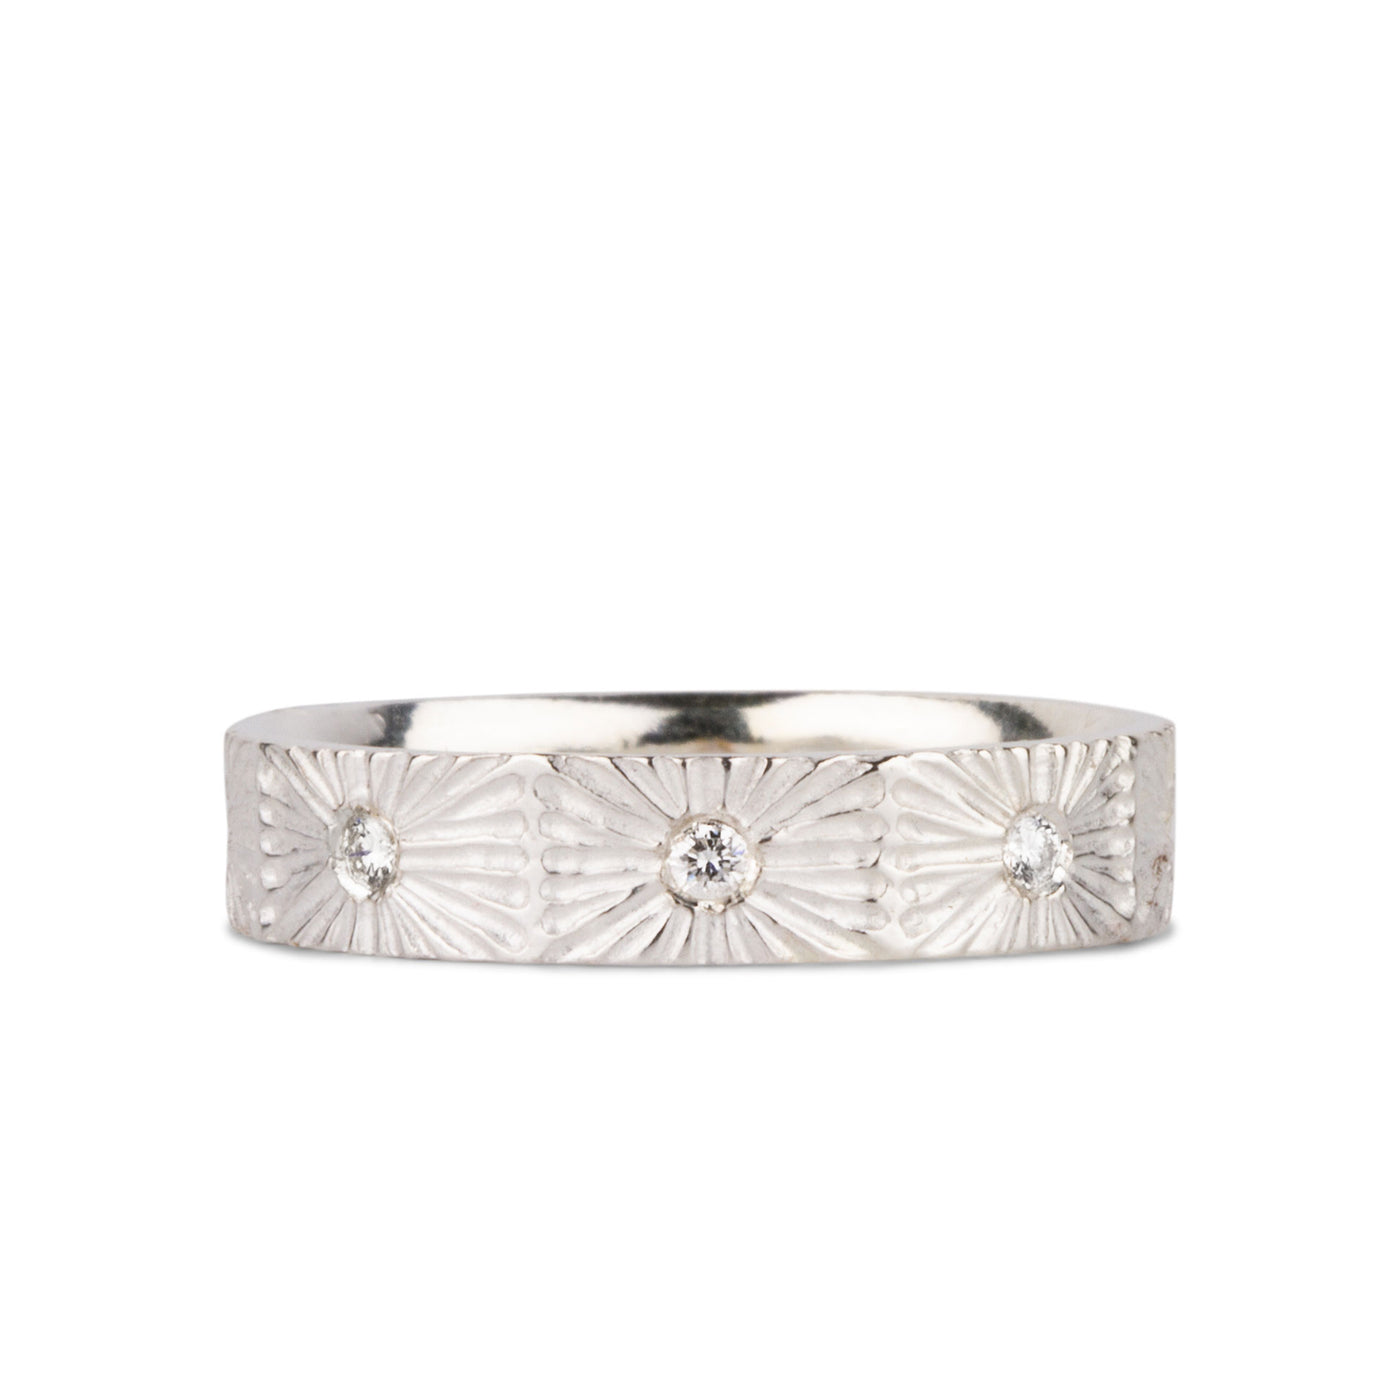 Nova sunburst eternity band with 8 flush set diamonds and carved texture around the outside in sterling silver